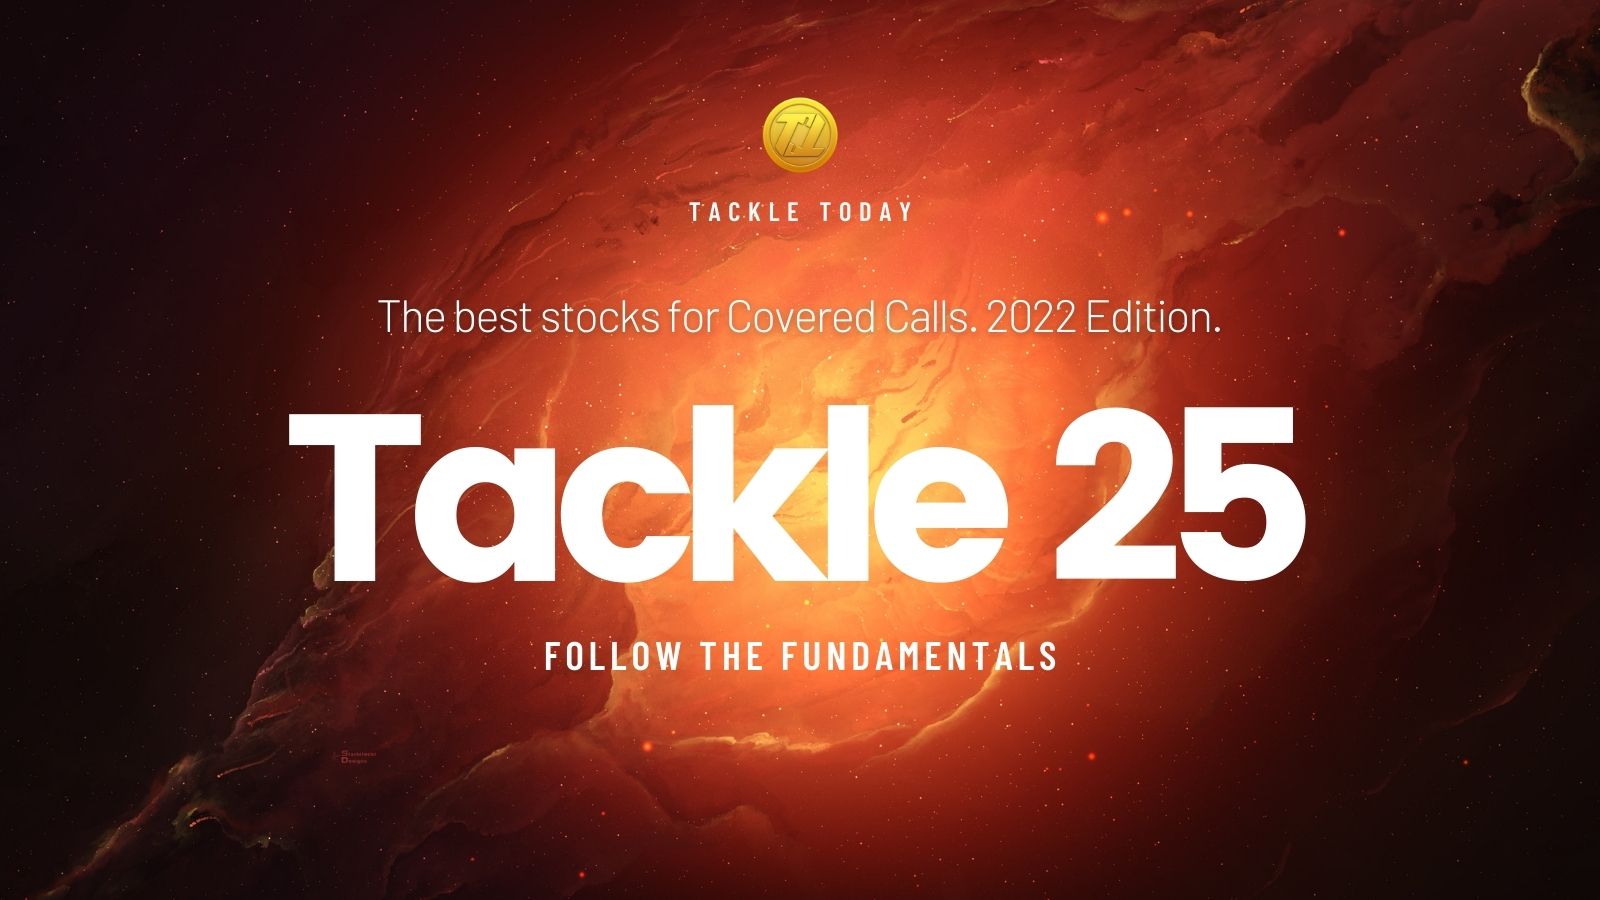 Tackle 25 - The best stocks for Covered Calls. 2022 Edition.